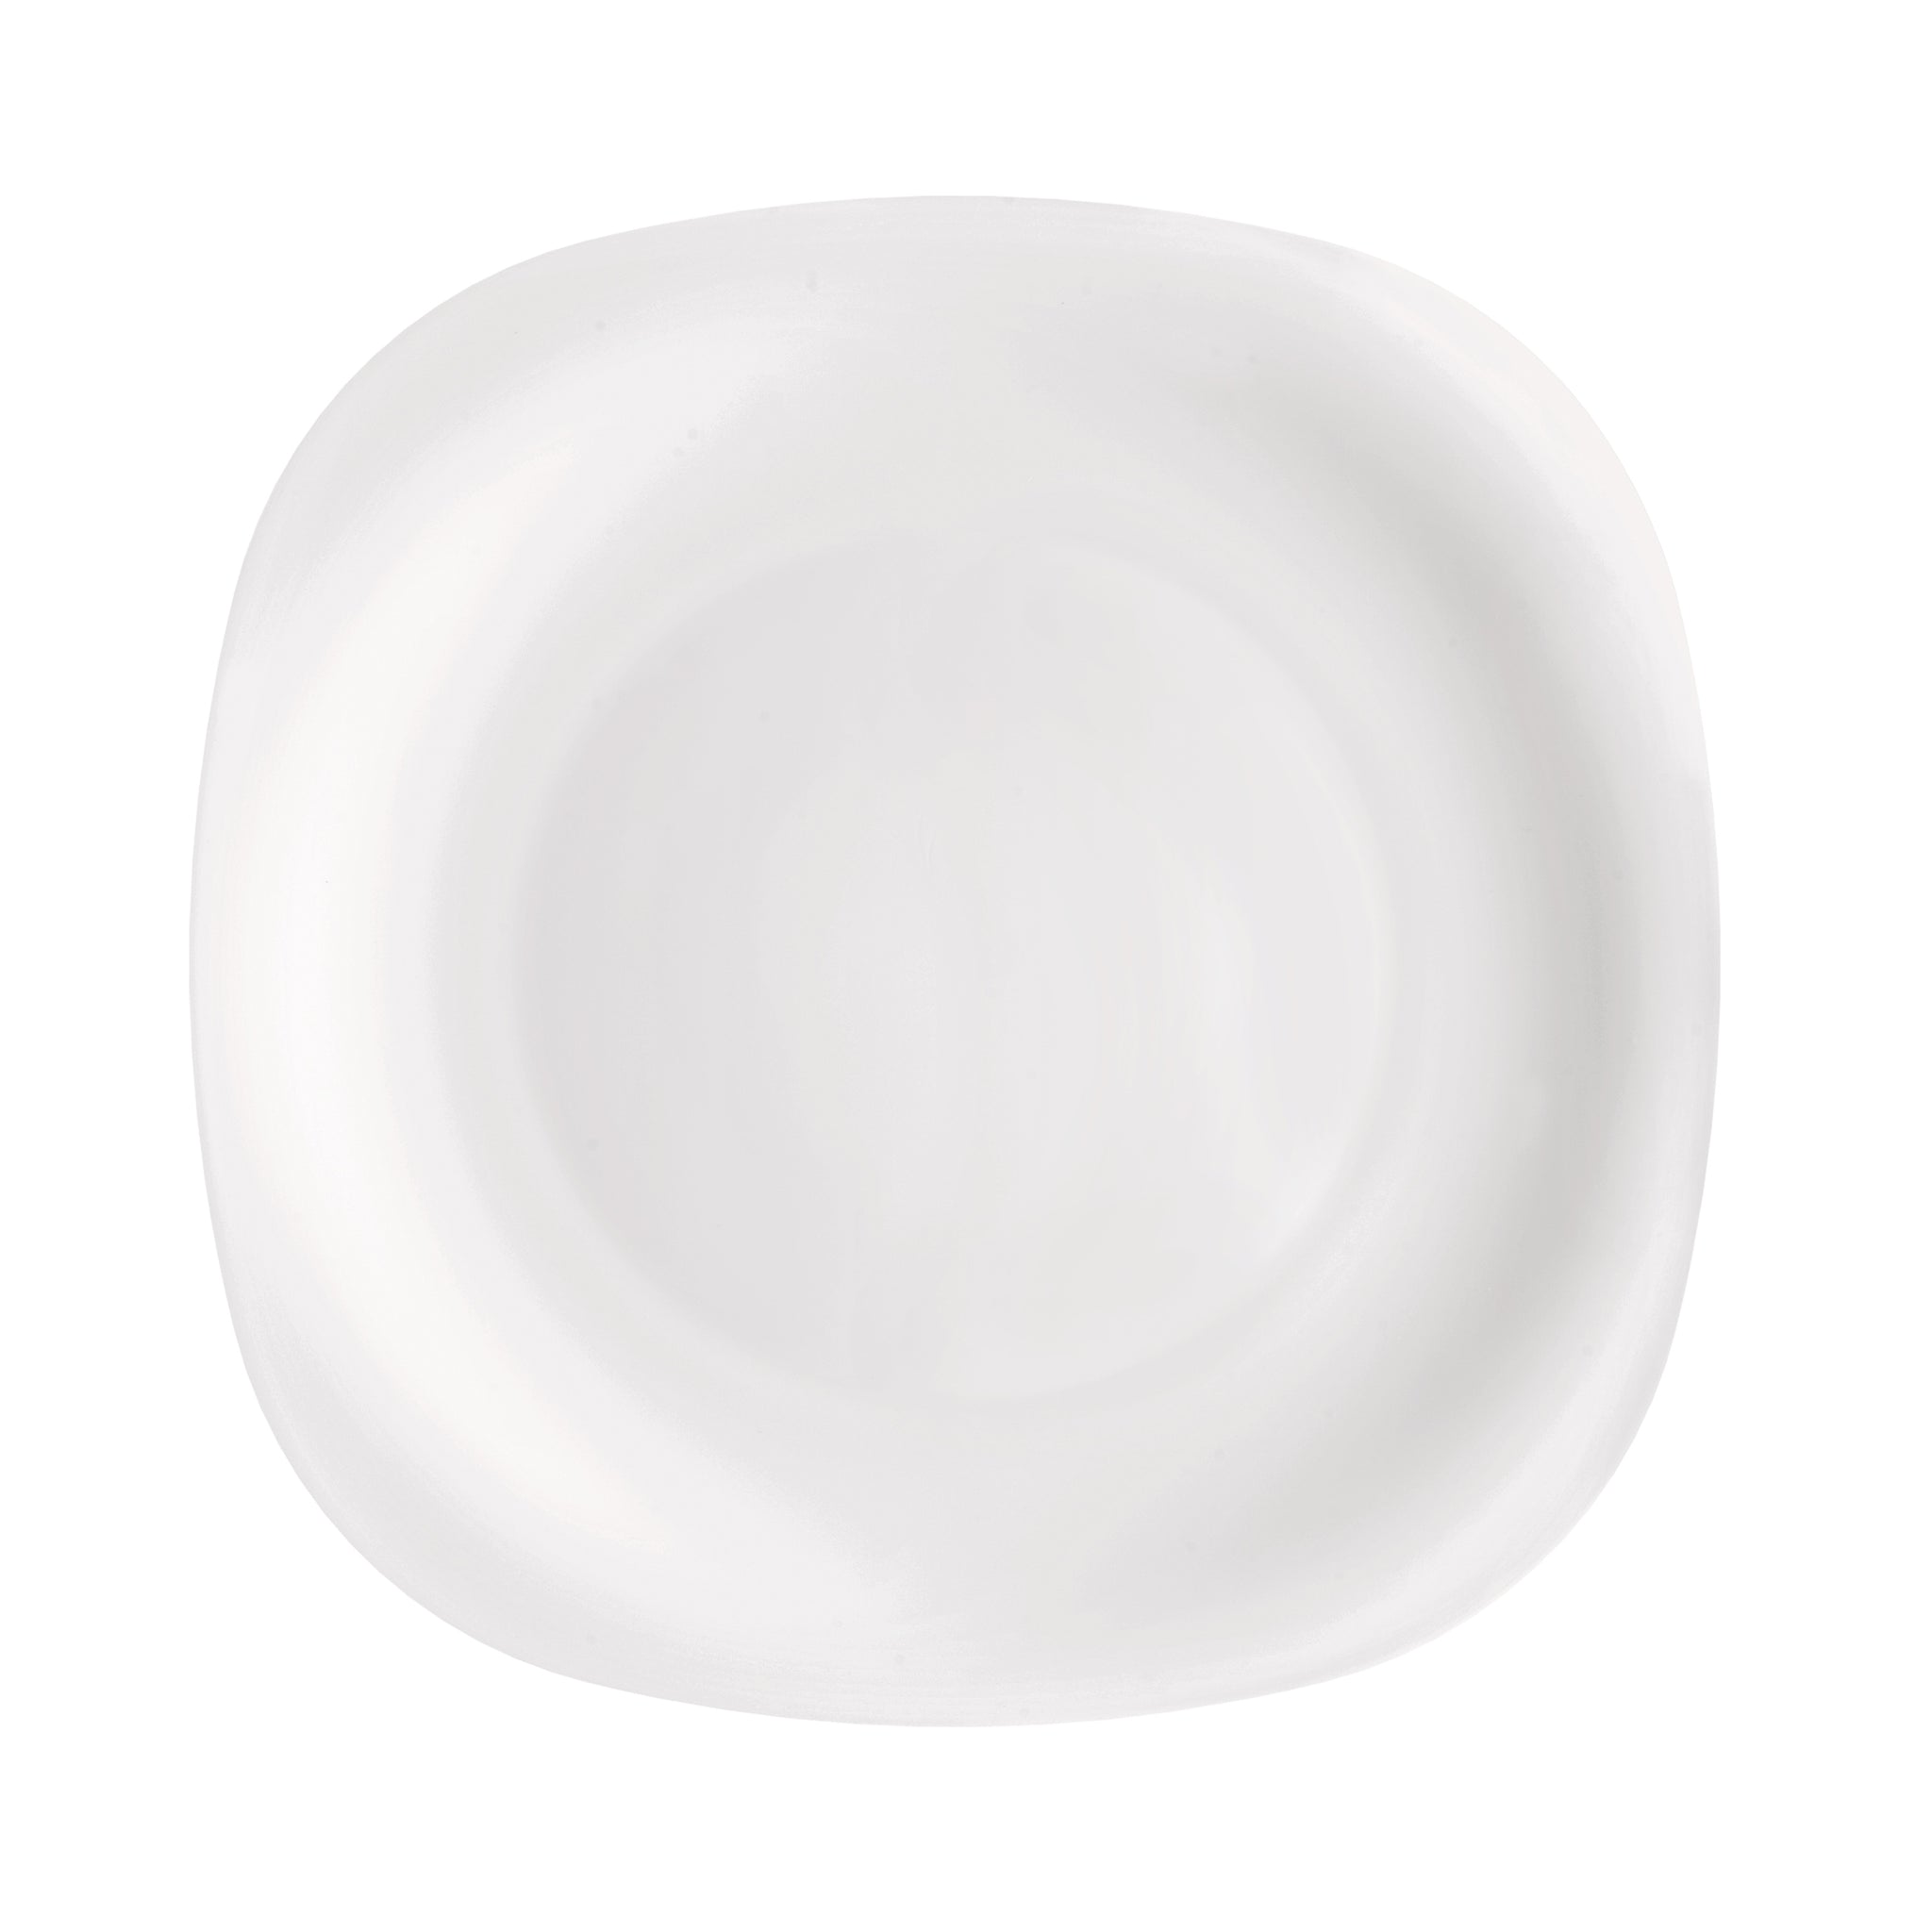 Parma 12.5" Opal Glass Charger Plate (Set of 12)